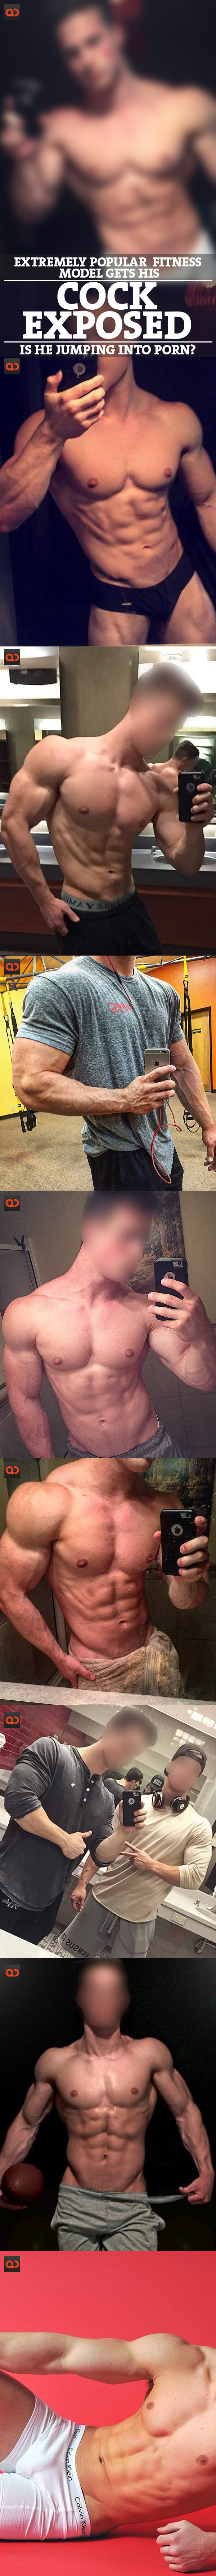 Extremely Popular Fitness Model Gets His Cock Exposed - Is He Jumping Into Porn?